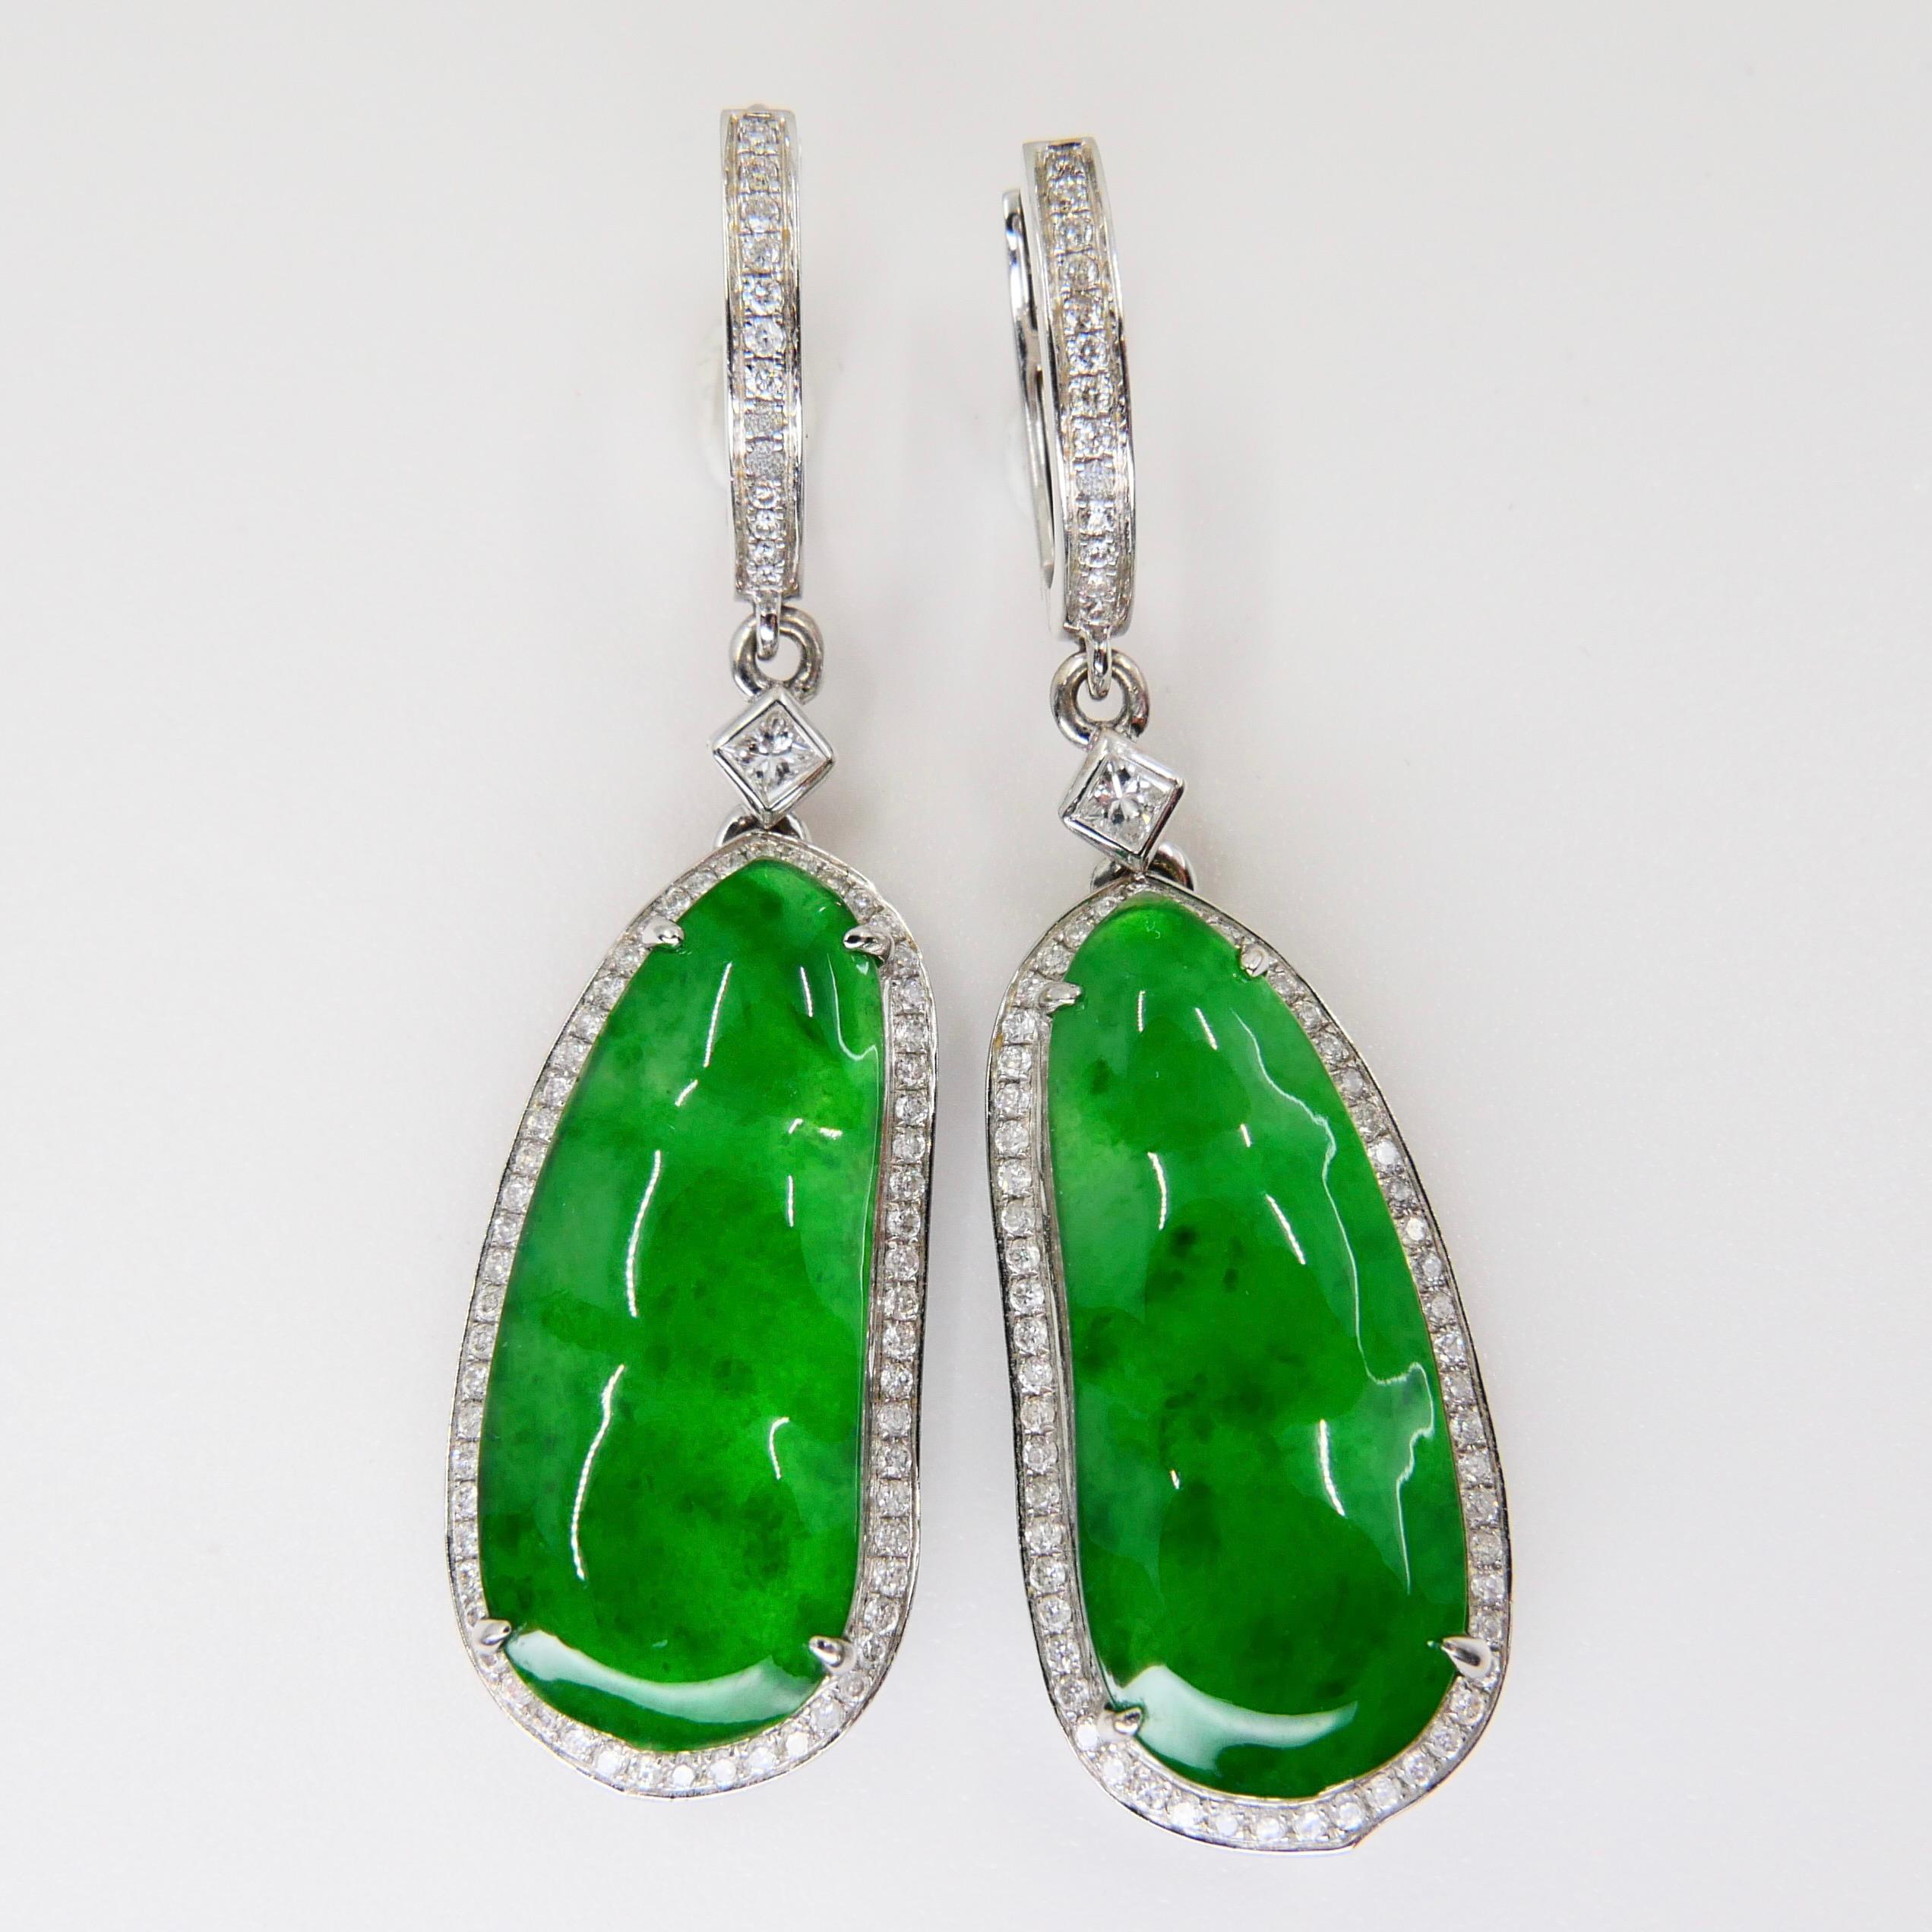 Certified Natural Type A Icy Jade Peapod Diamond Earrings, Glowing Apple Green For Sale 1